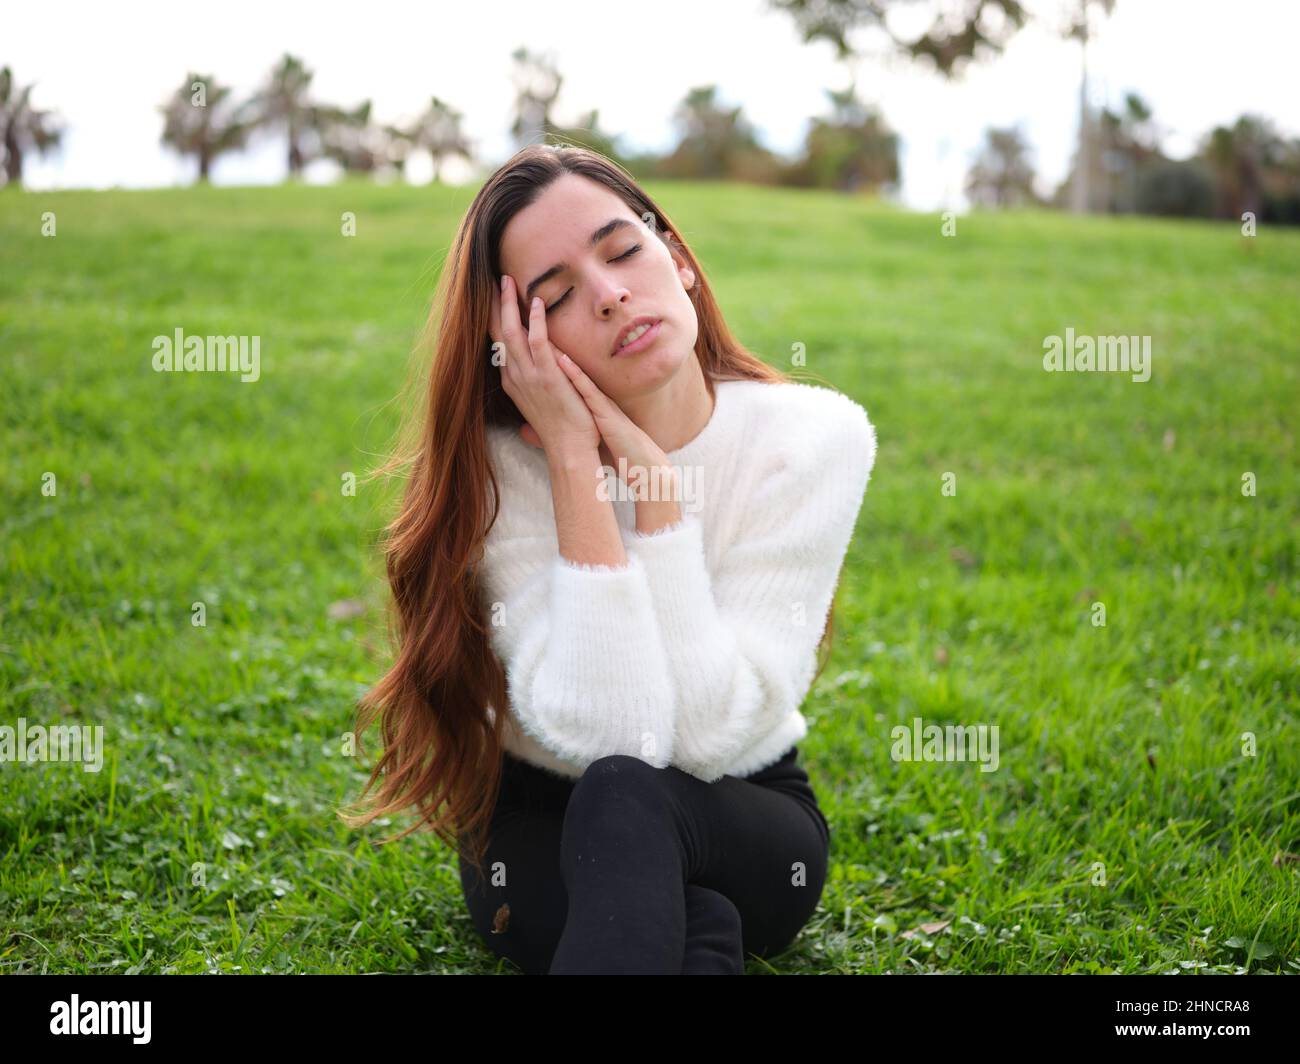 A young woman in the park sitting on the grass with her hands on her face and her eyes closed daydreaming. Stock Photo